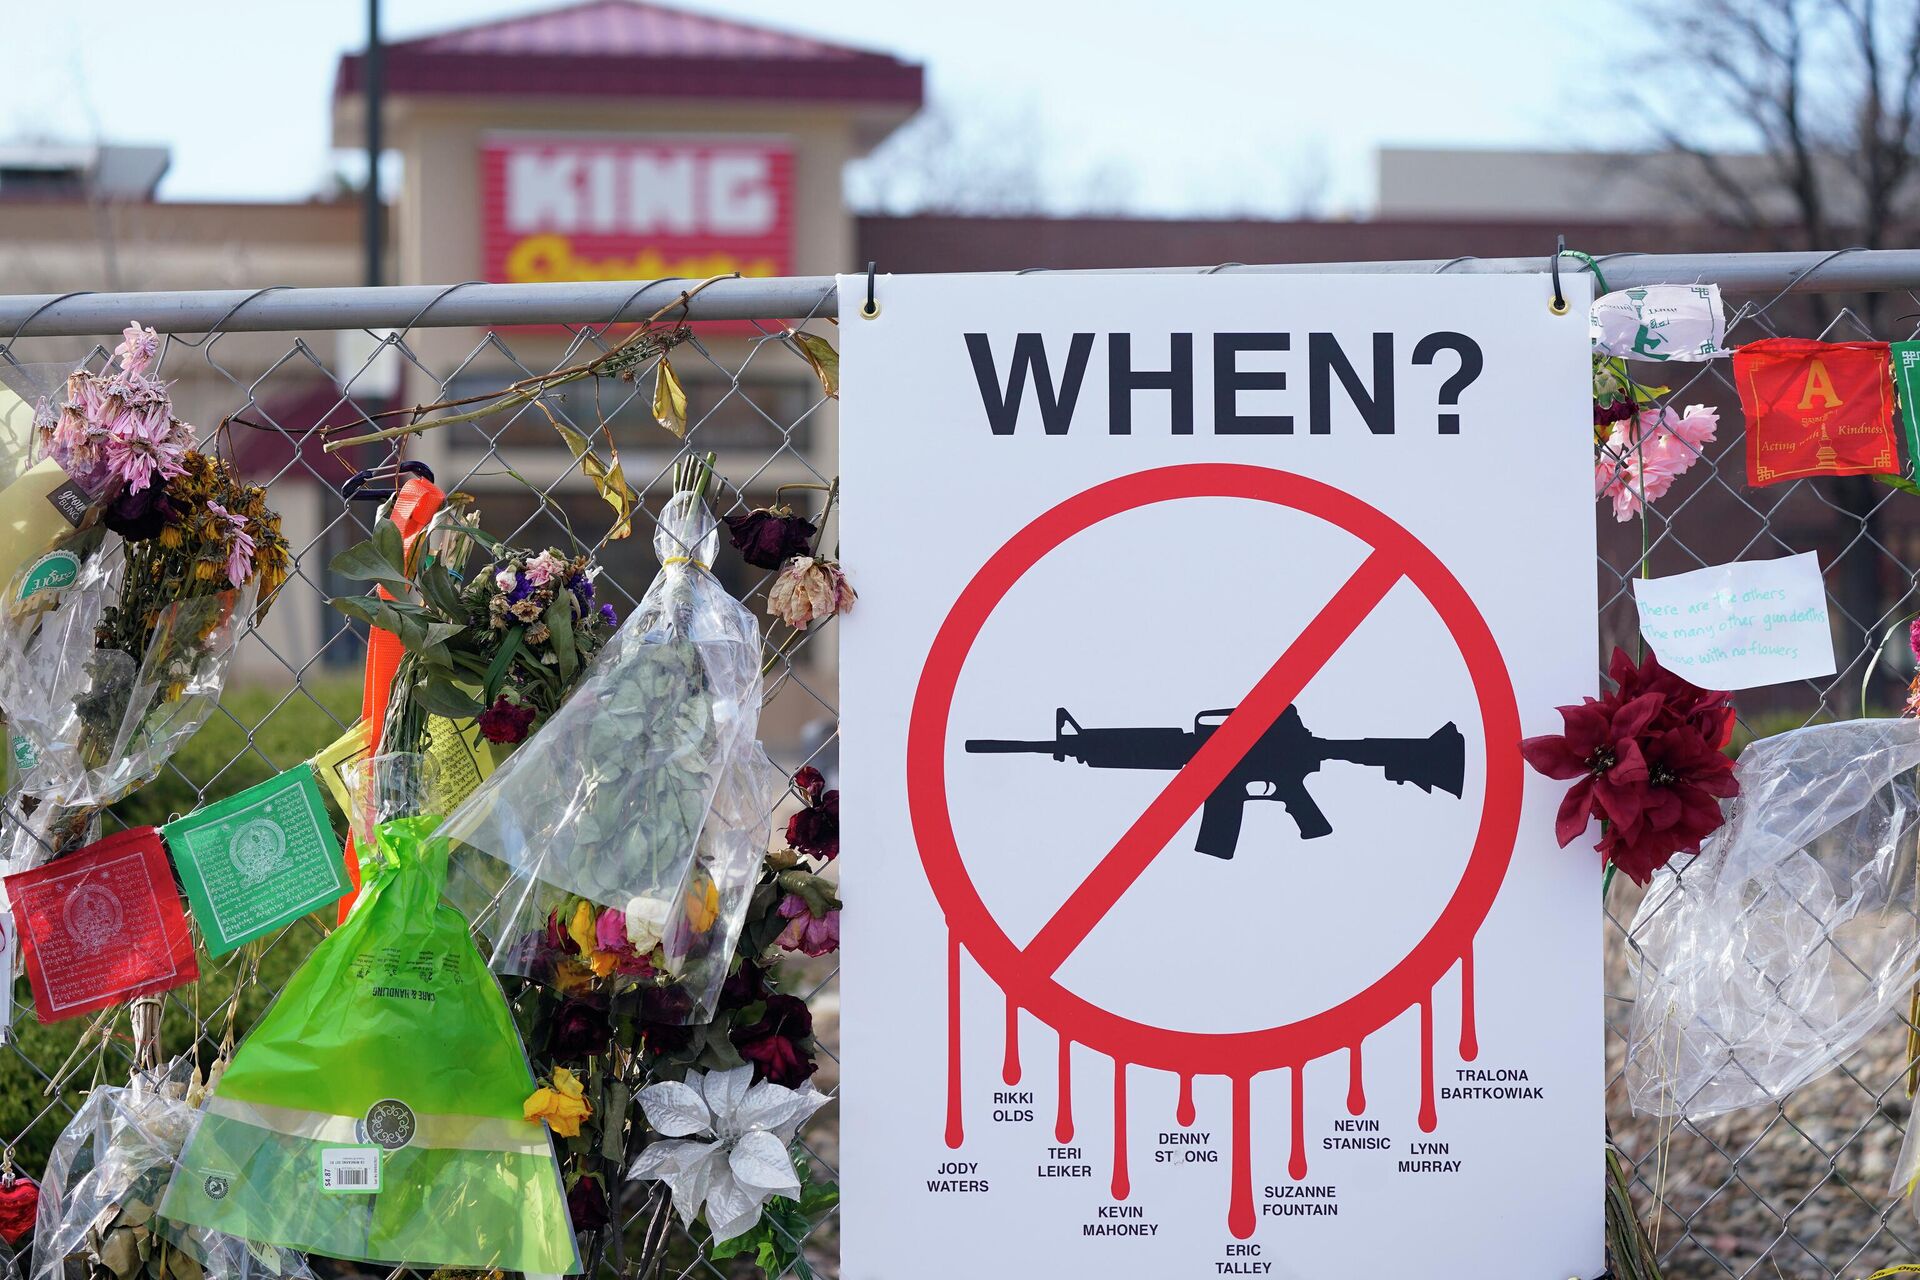  Tributes hang on the temporary fence surrounding the parking lot in front of a King Soopers grocery store in which 10 people died in a late March mass shooting, Friday, April 9, 2021, in Boulder, Colo.  - Sputnik International, 1920, 01.09.2022